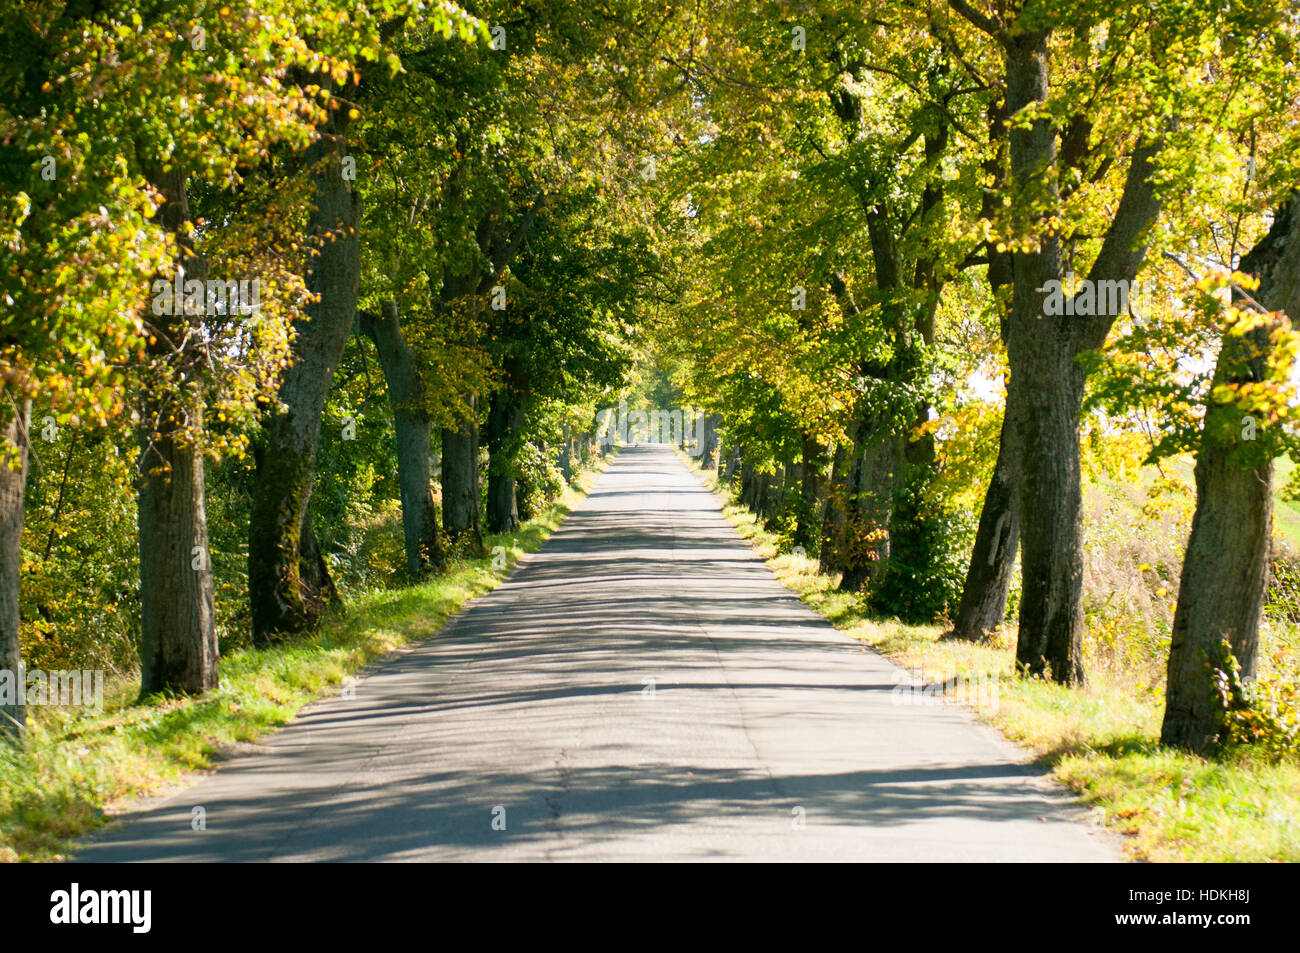 Road in forest in autumn. Autumn scene with road in forest. Stock Photo